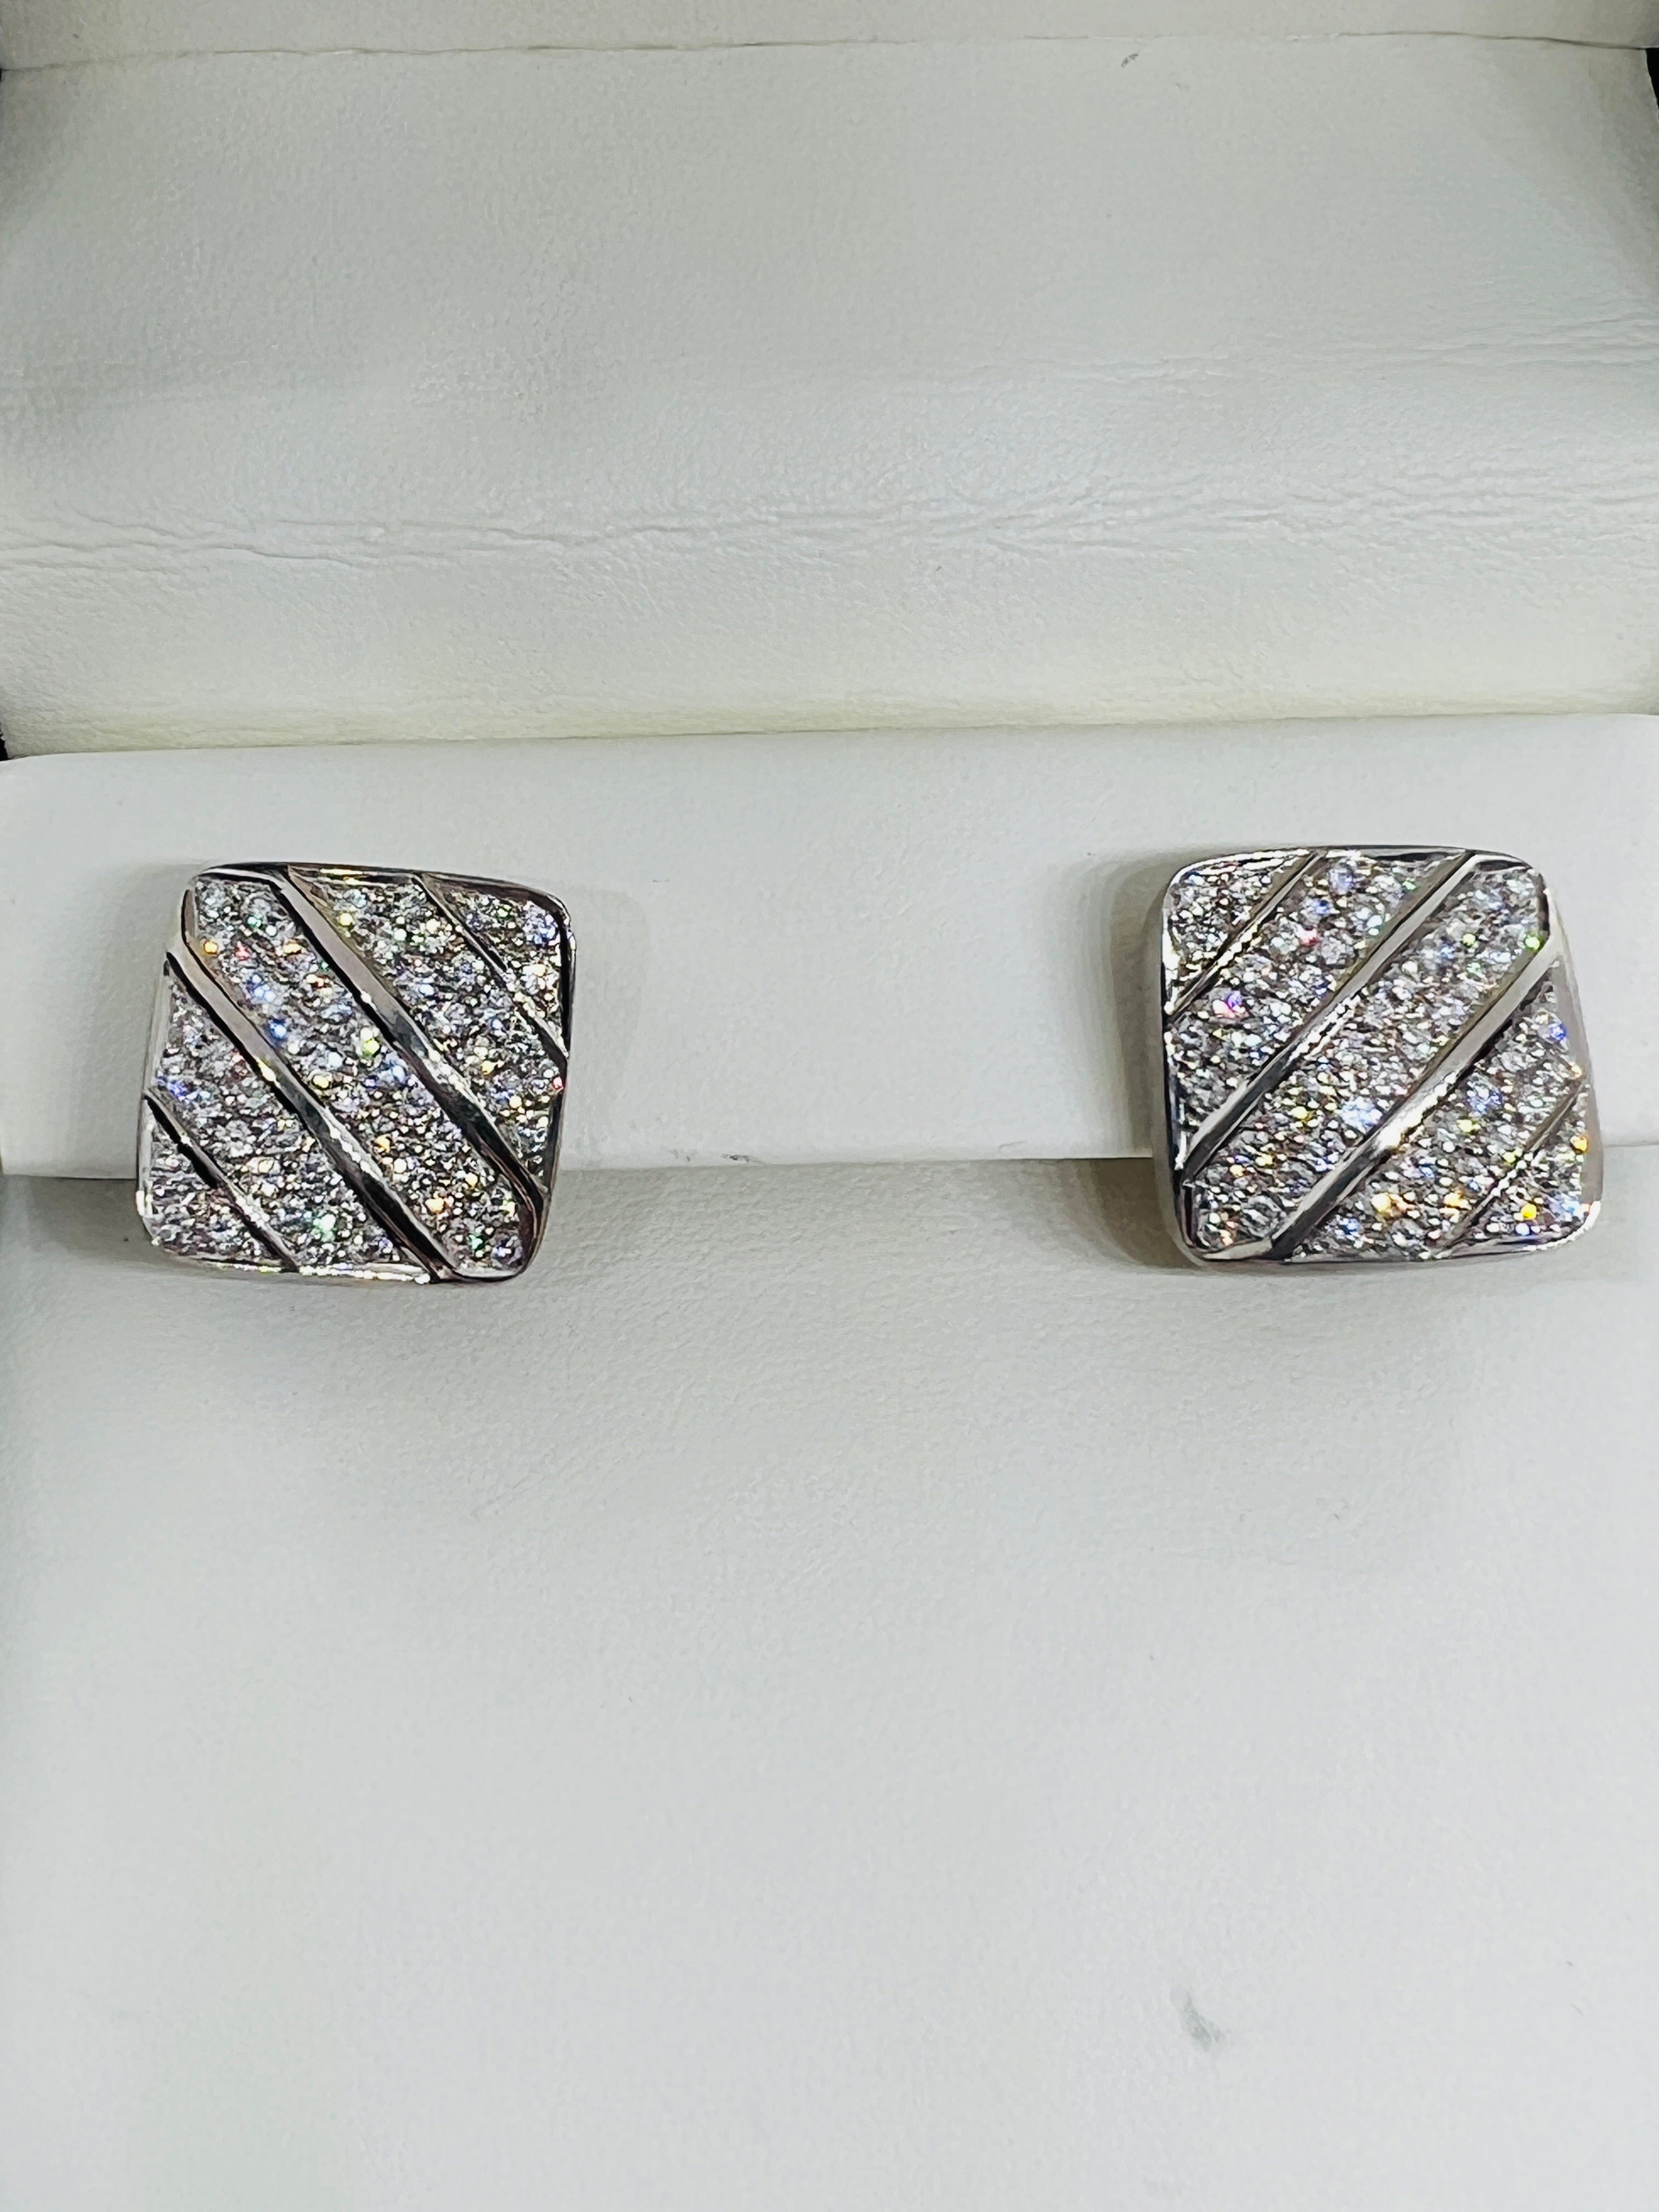 Gorgeous Designer Marlene Stowe 18K White Gold and Diamond square earrings. These earrings boast 108 gorgeous diamond with an estimated total carat weight of 3 carats. These measure three quarter inch square and weigh 19.1 grams. These feature a